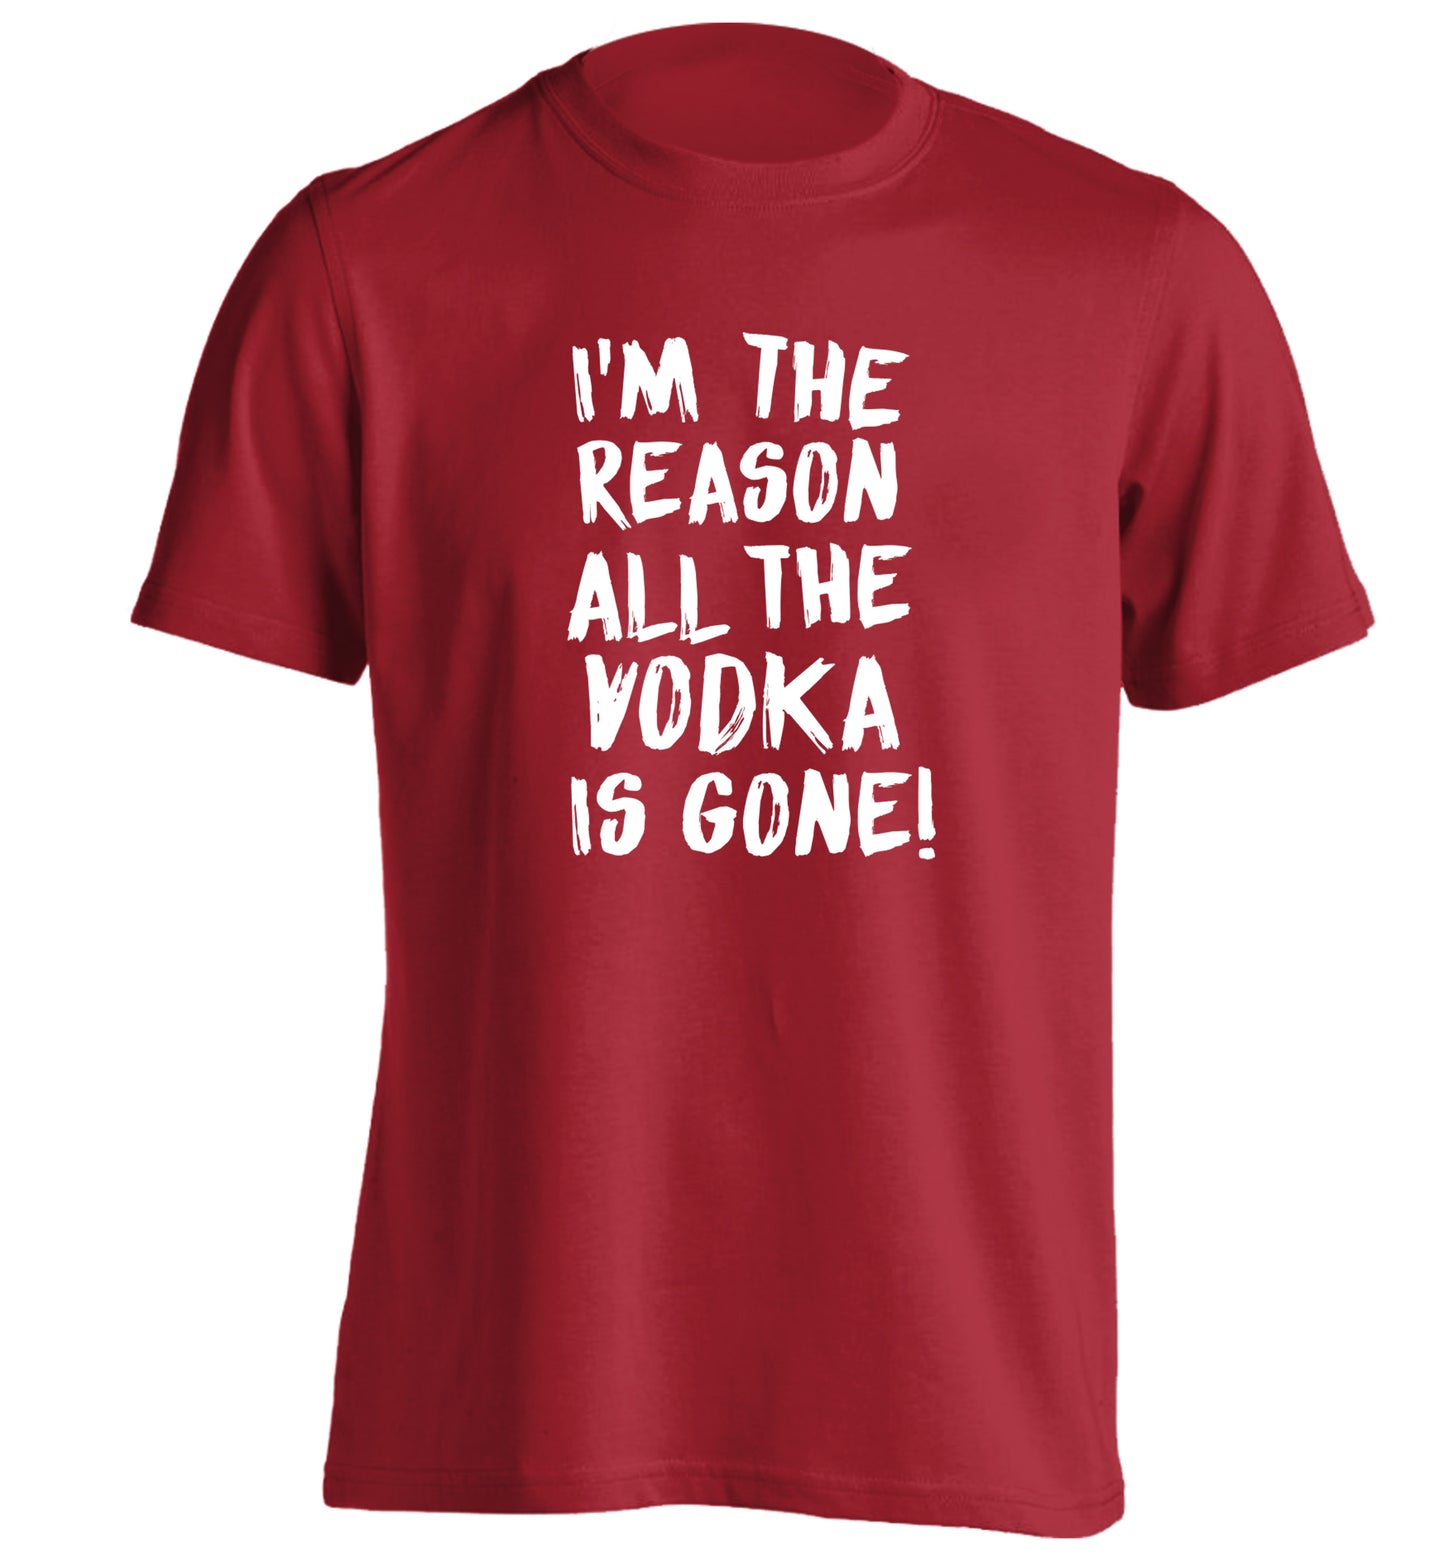 I'm the reason all the tequila is gone adults unisex red Tshirt 2XL